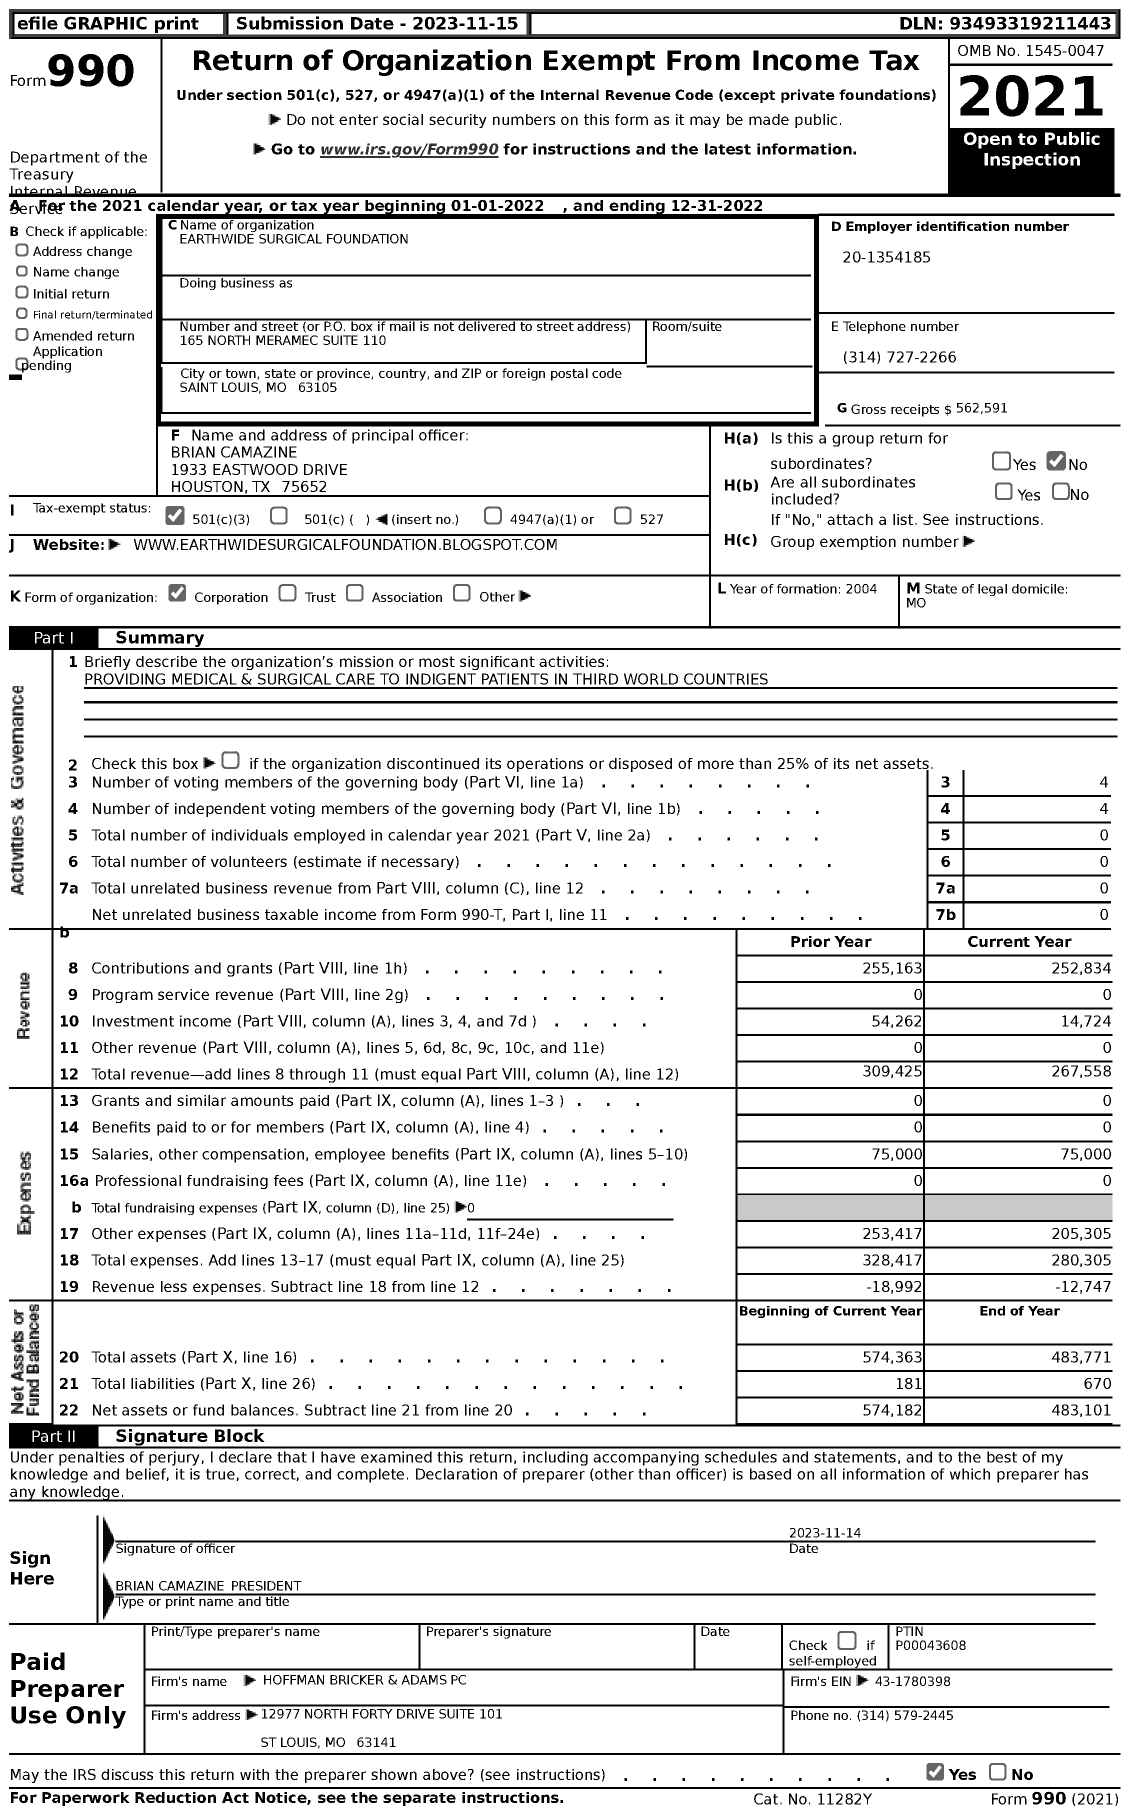 Image of first page of 2022 Form 990 for Earthwide Surgical Foundation